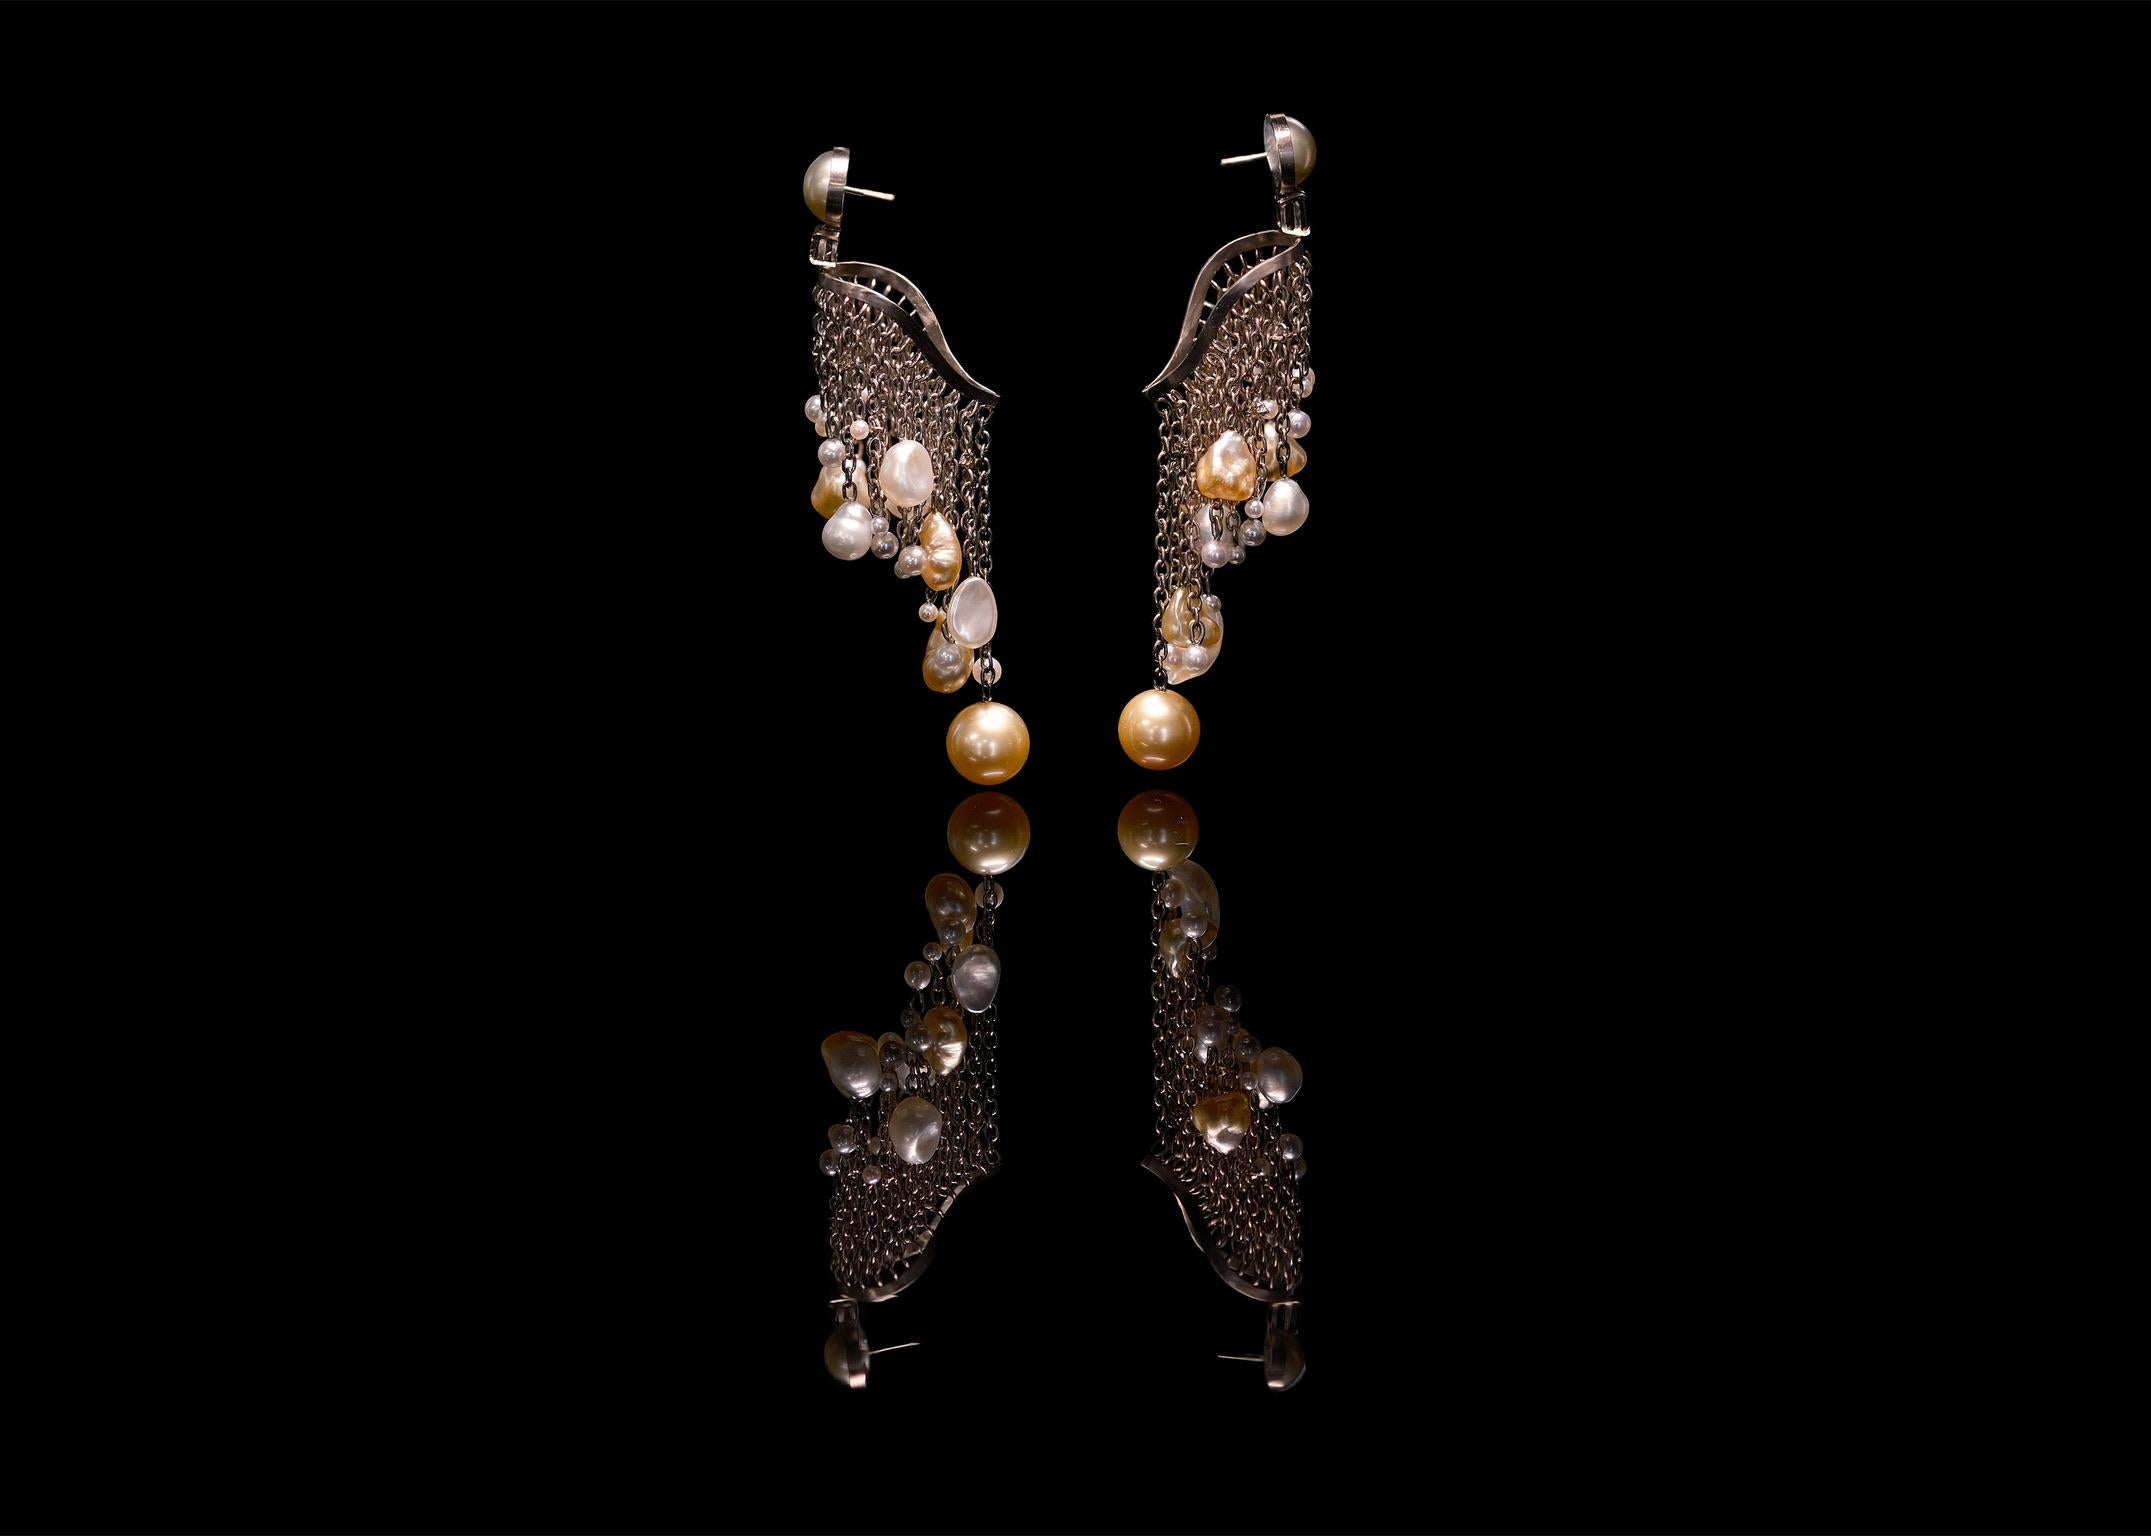 Contemporary 18K Fairmined Gold, Sustainable Pearls, 1.67ct Ocean Diamonds, “medusa” Earrings For Sale